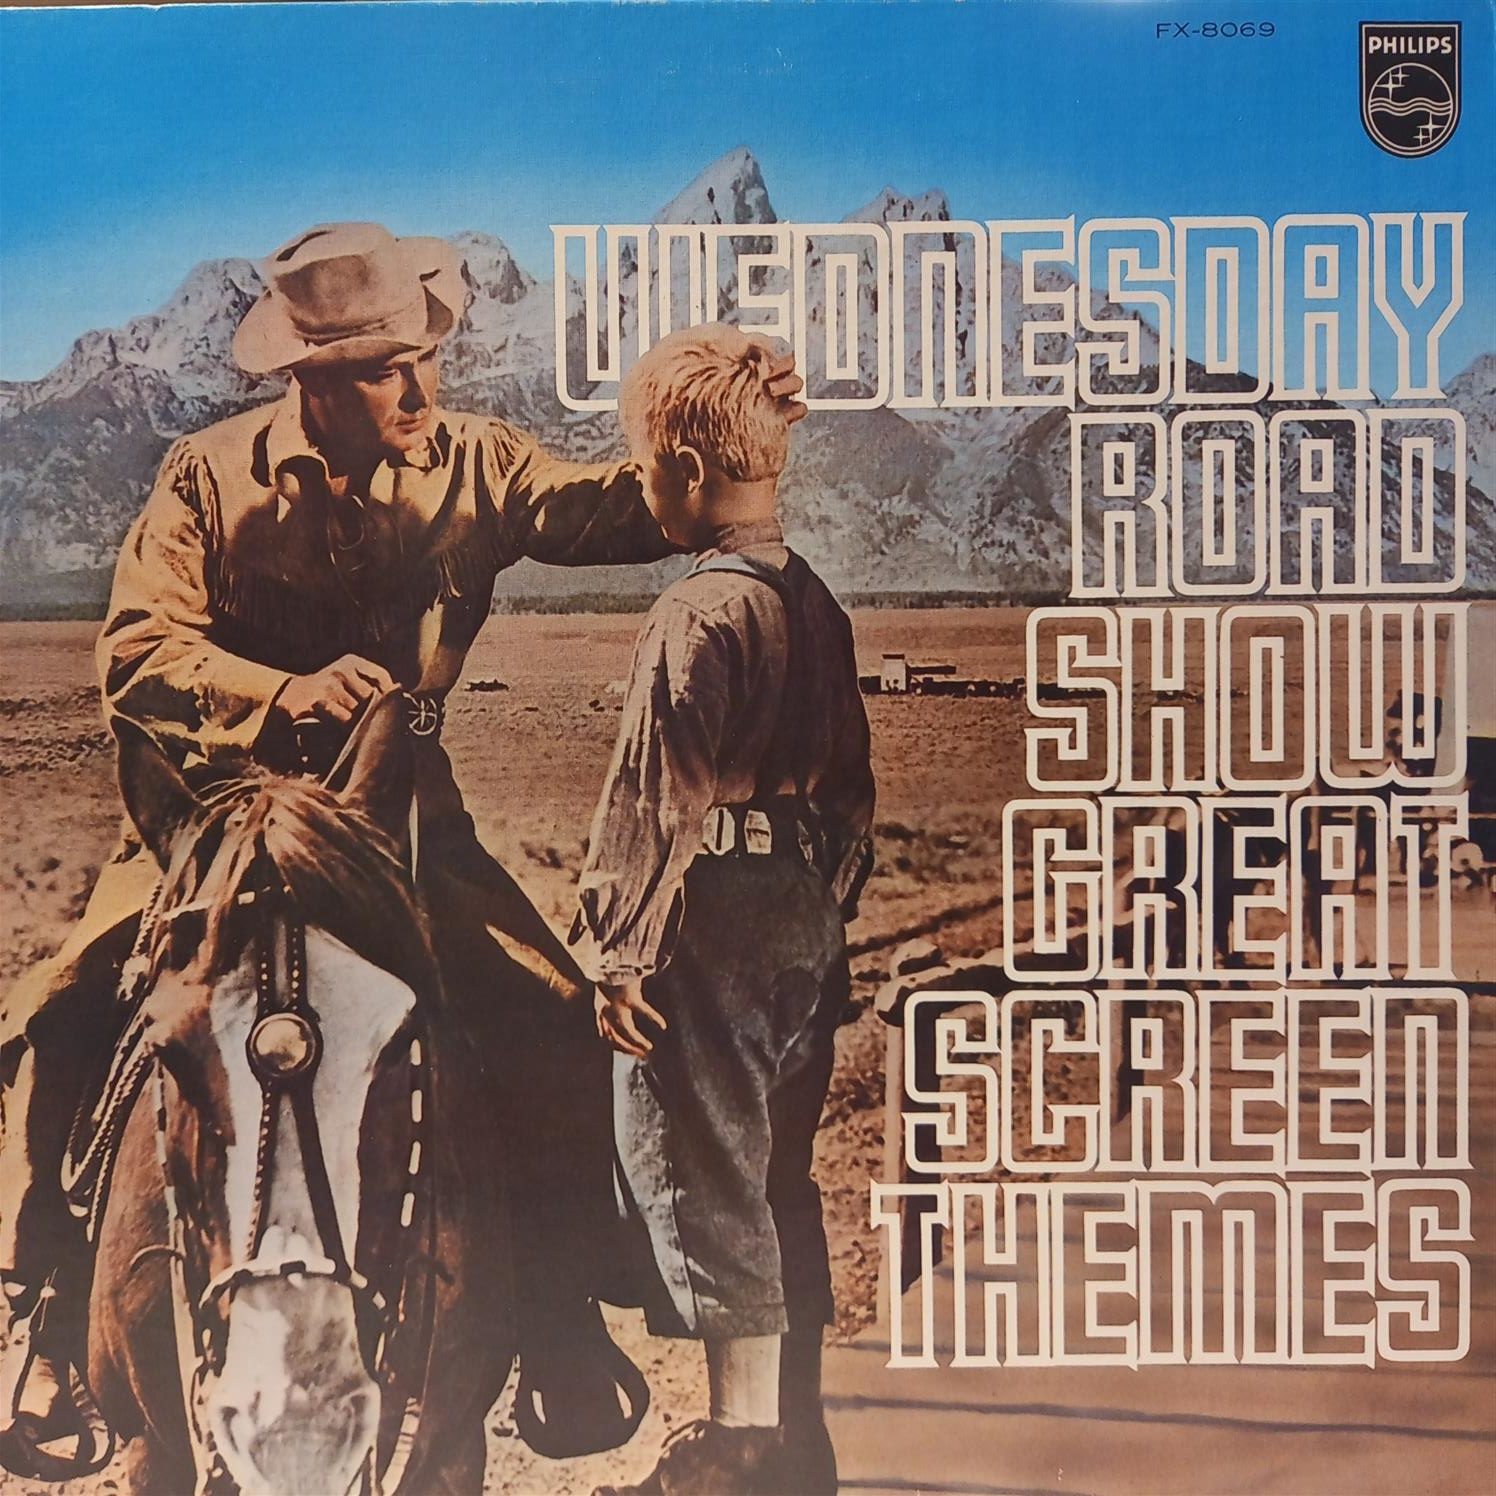 CLAUDE PHILIP ORCHESTRA – WEDNESDAY ROAD SHOW GREAT SCREEN THEMES ON